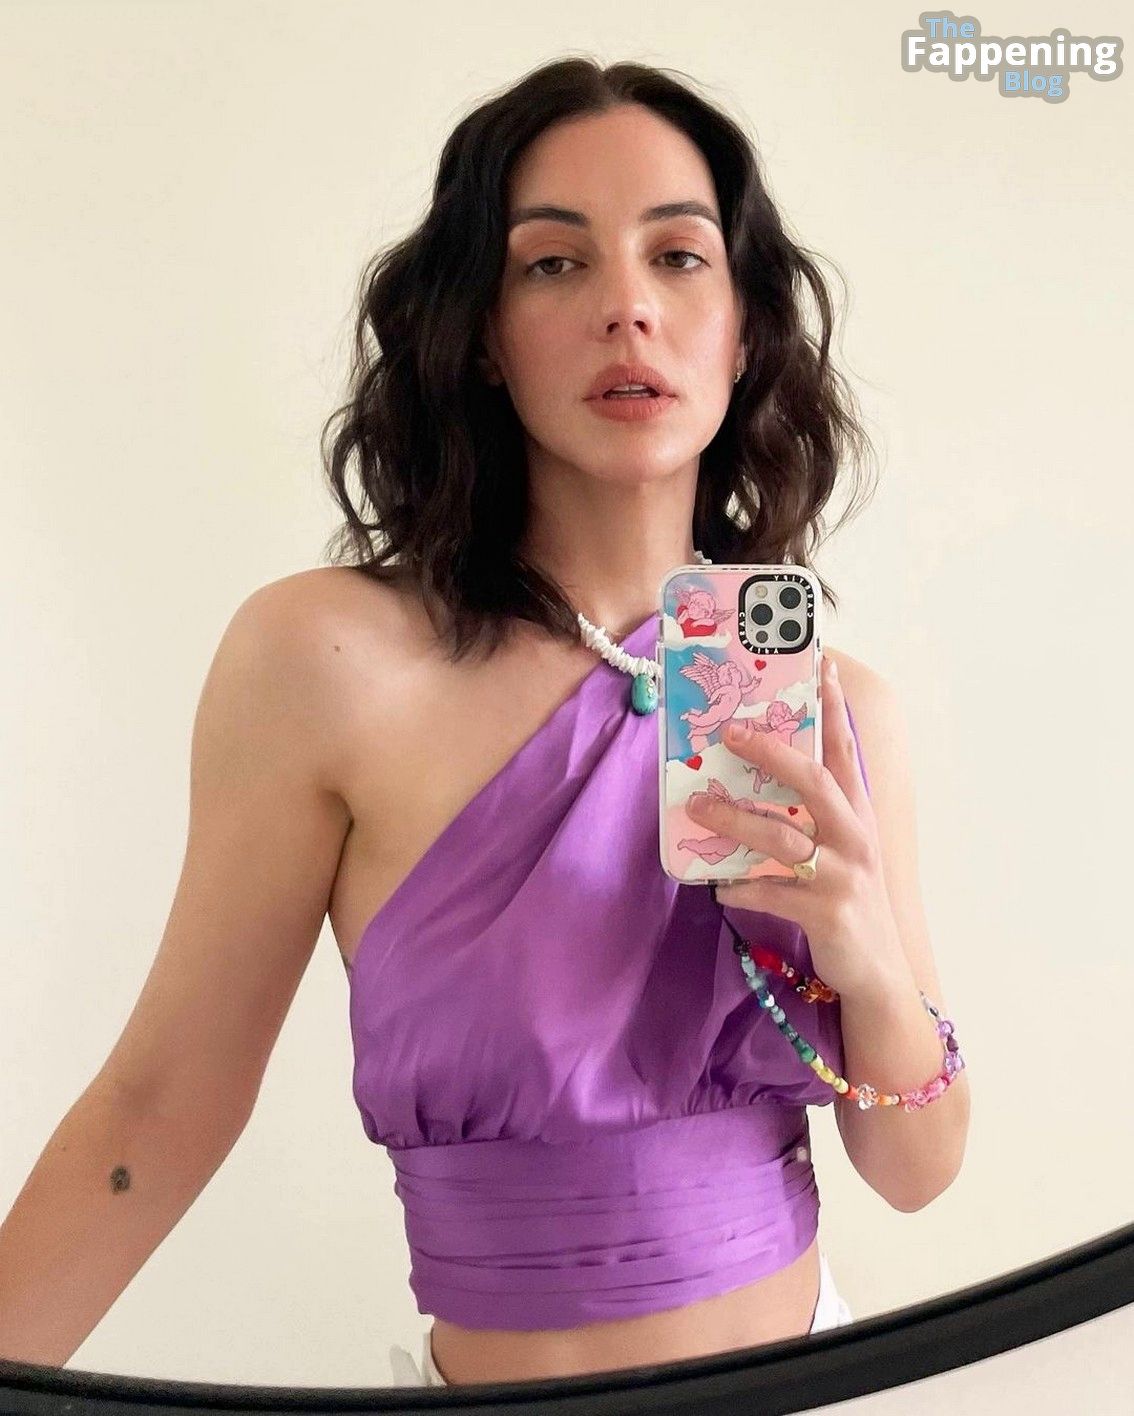 Adelaide-Kane-Nude-Sexy-The-Fappening-Blog-30.jpg